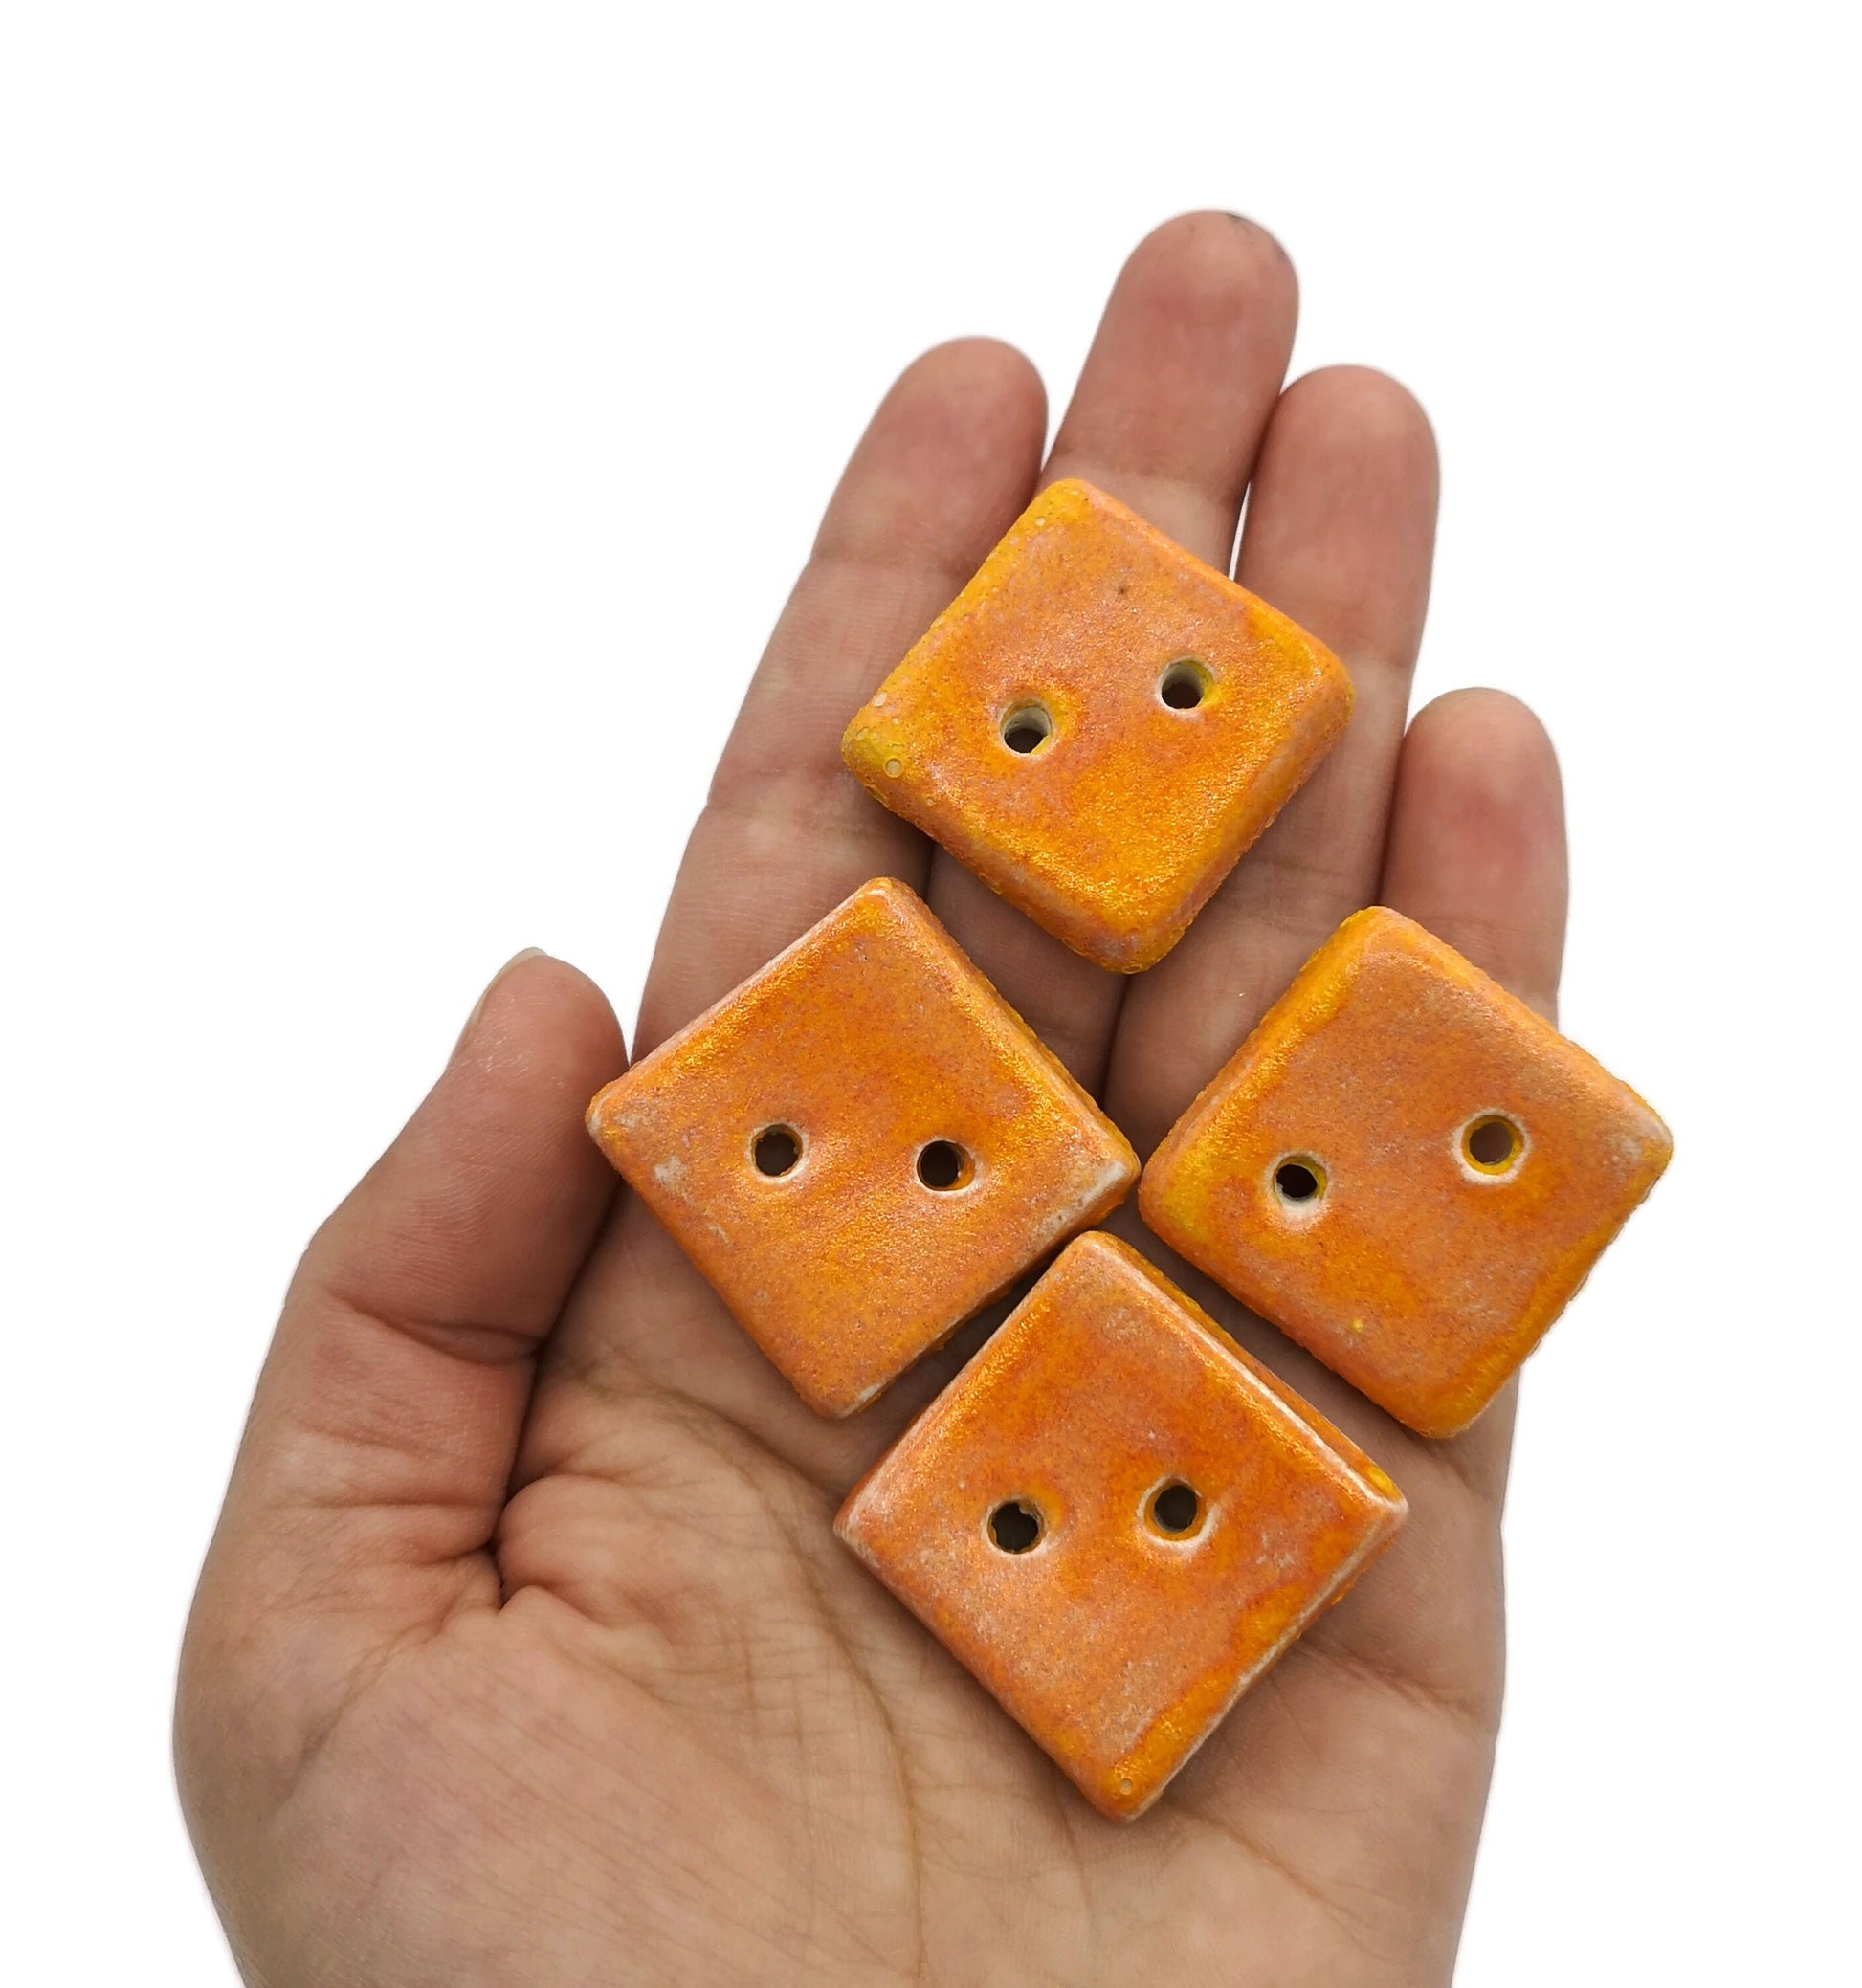 4Pc 30mm Extra Large Buttons, Orange Buttons Square, Handmade Ceramic Craft Sewing Buttons, Fancy Clay Coat Buttons 2 Holes Flatback - Ceramica Ana Rafael